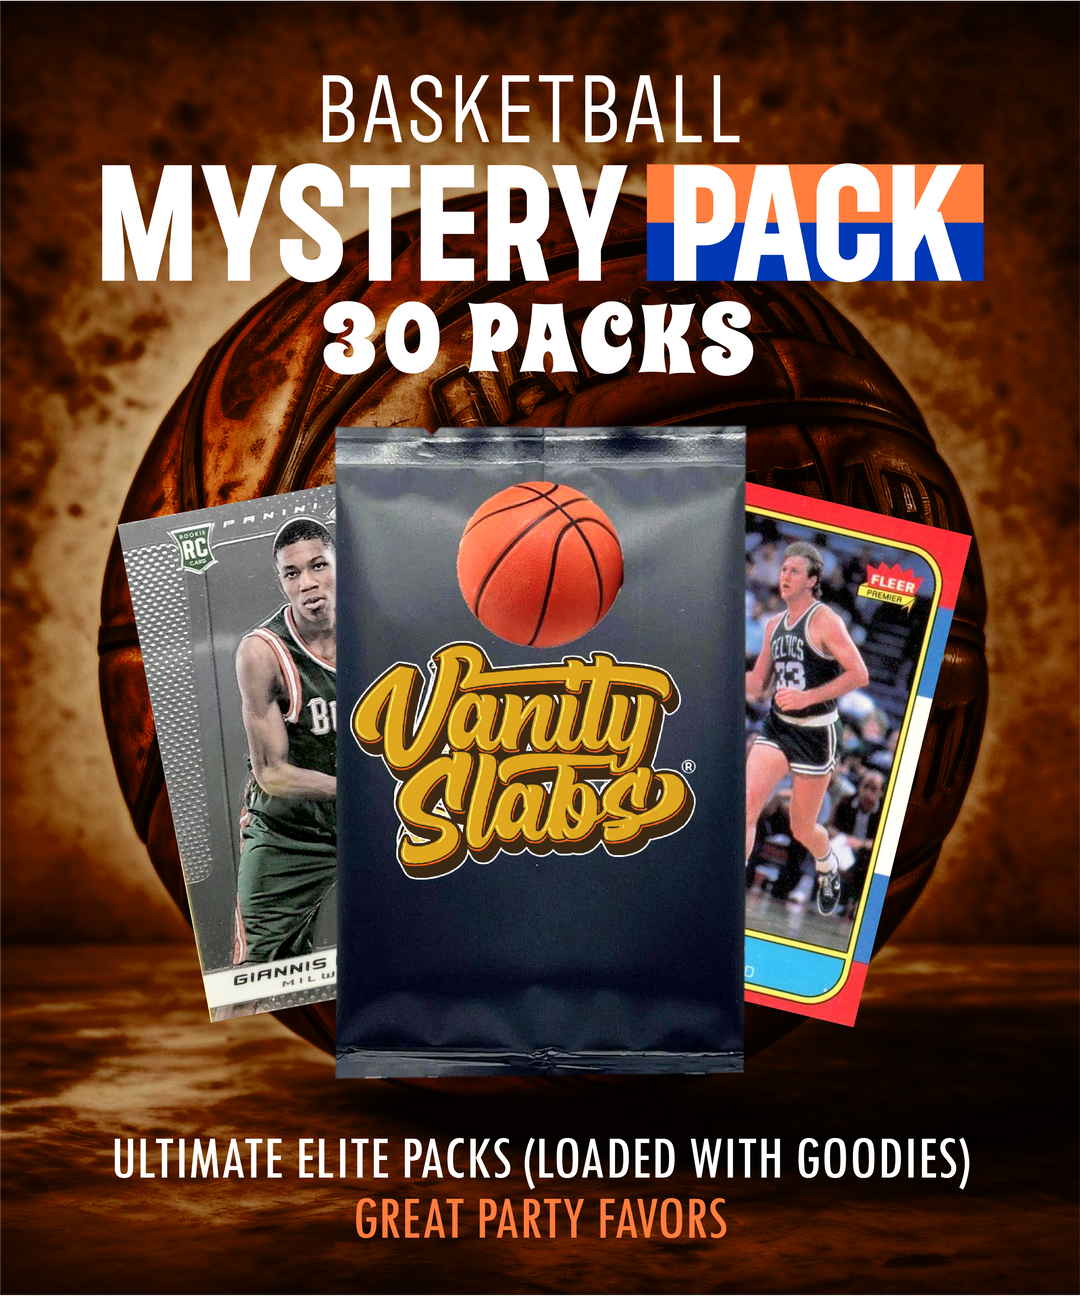 Basketball Mystery 30 Ultimate Elite Packs (Loaded with Goodies) Great Party Favors